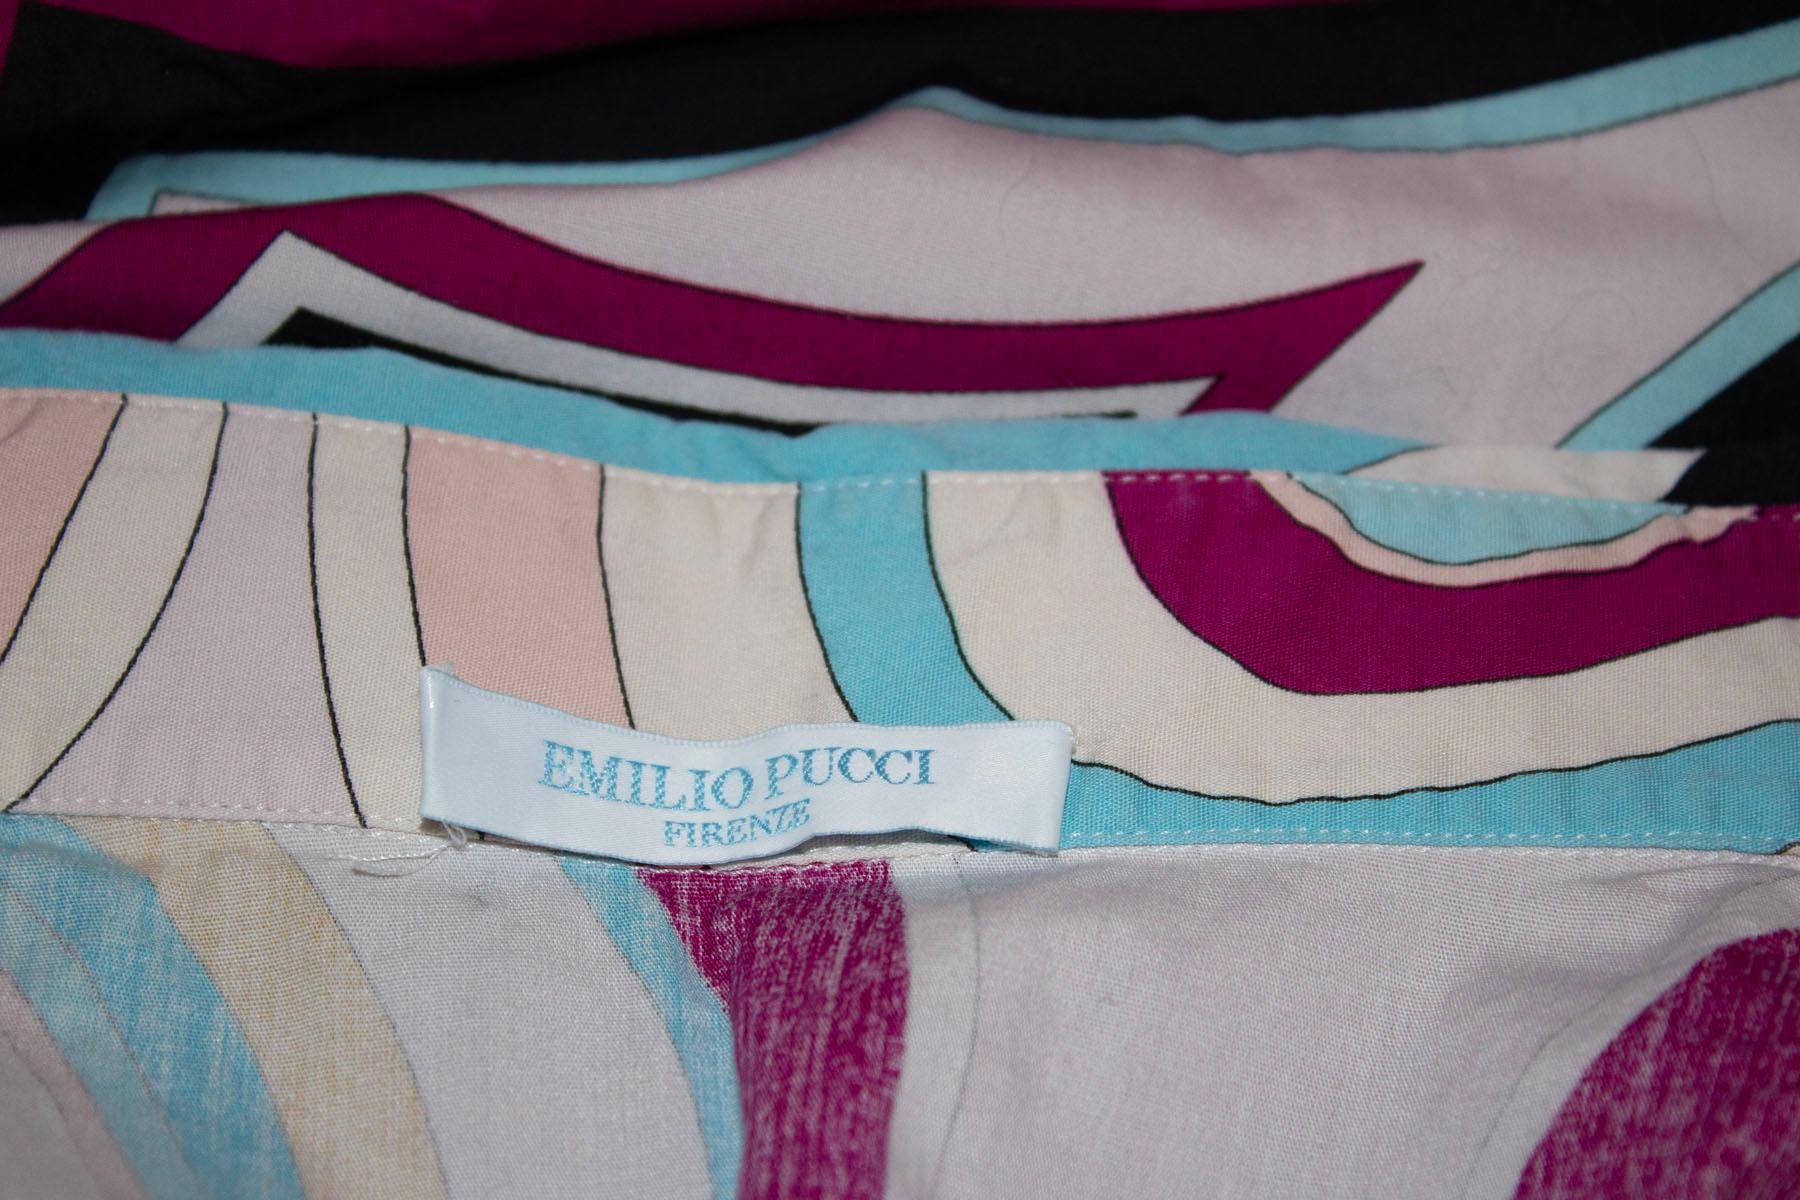 A stunning , and colourful vintage cotton shirt by Emilio Pucci. The shirt is in the iconic Pucci print with a white background and multi colour print. It has the original buttons, and has a button front opening with single button and turn back